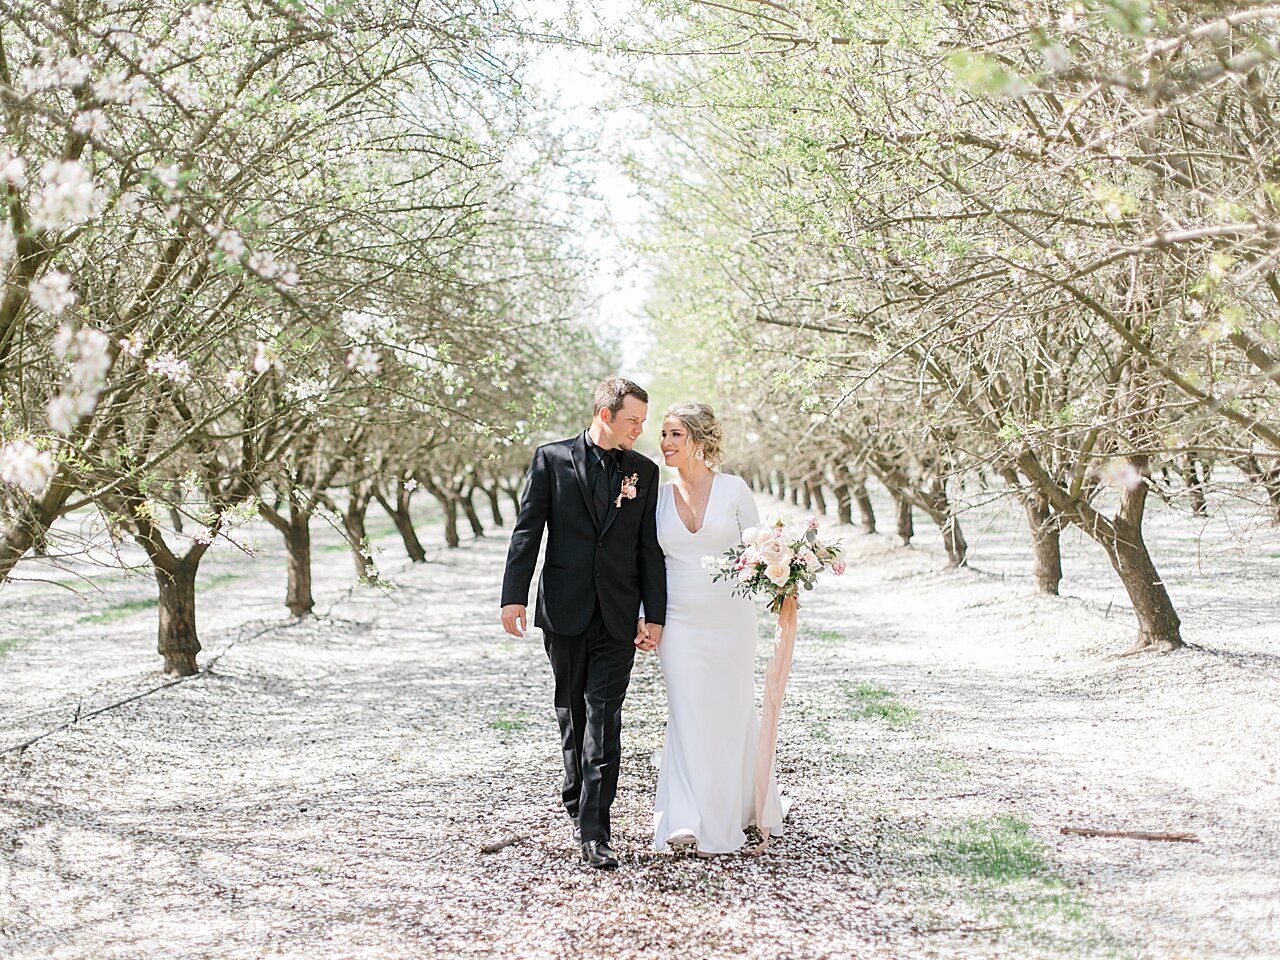 Emerald grace floral design wedding with Lauren Westra photography almond orchard bride and groom soft blush color palette central california weddings_2494